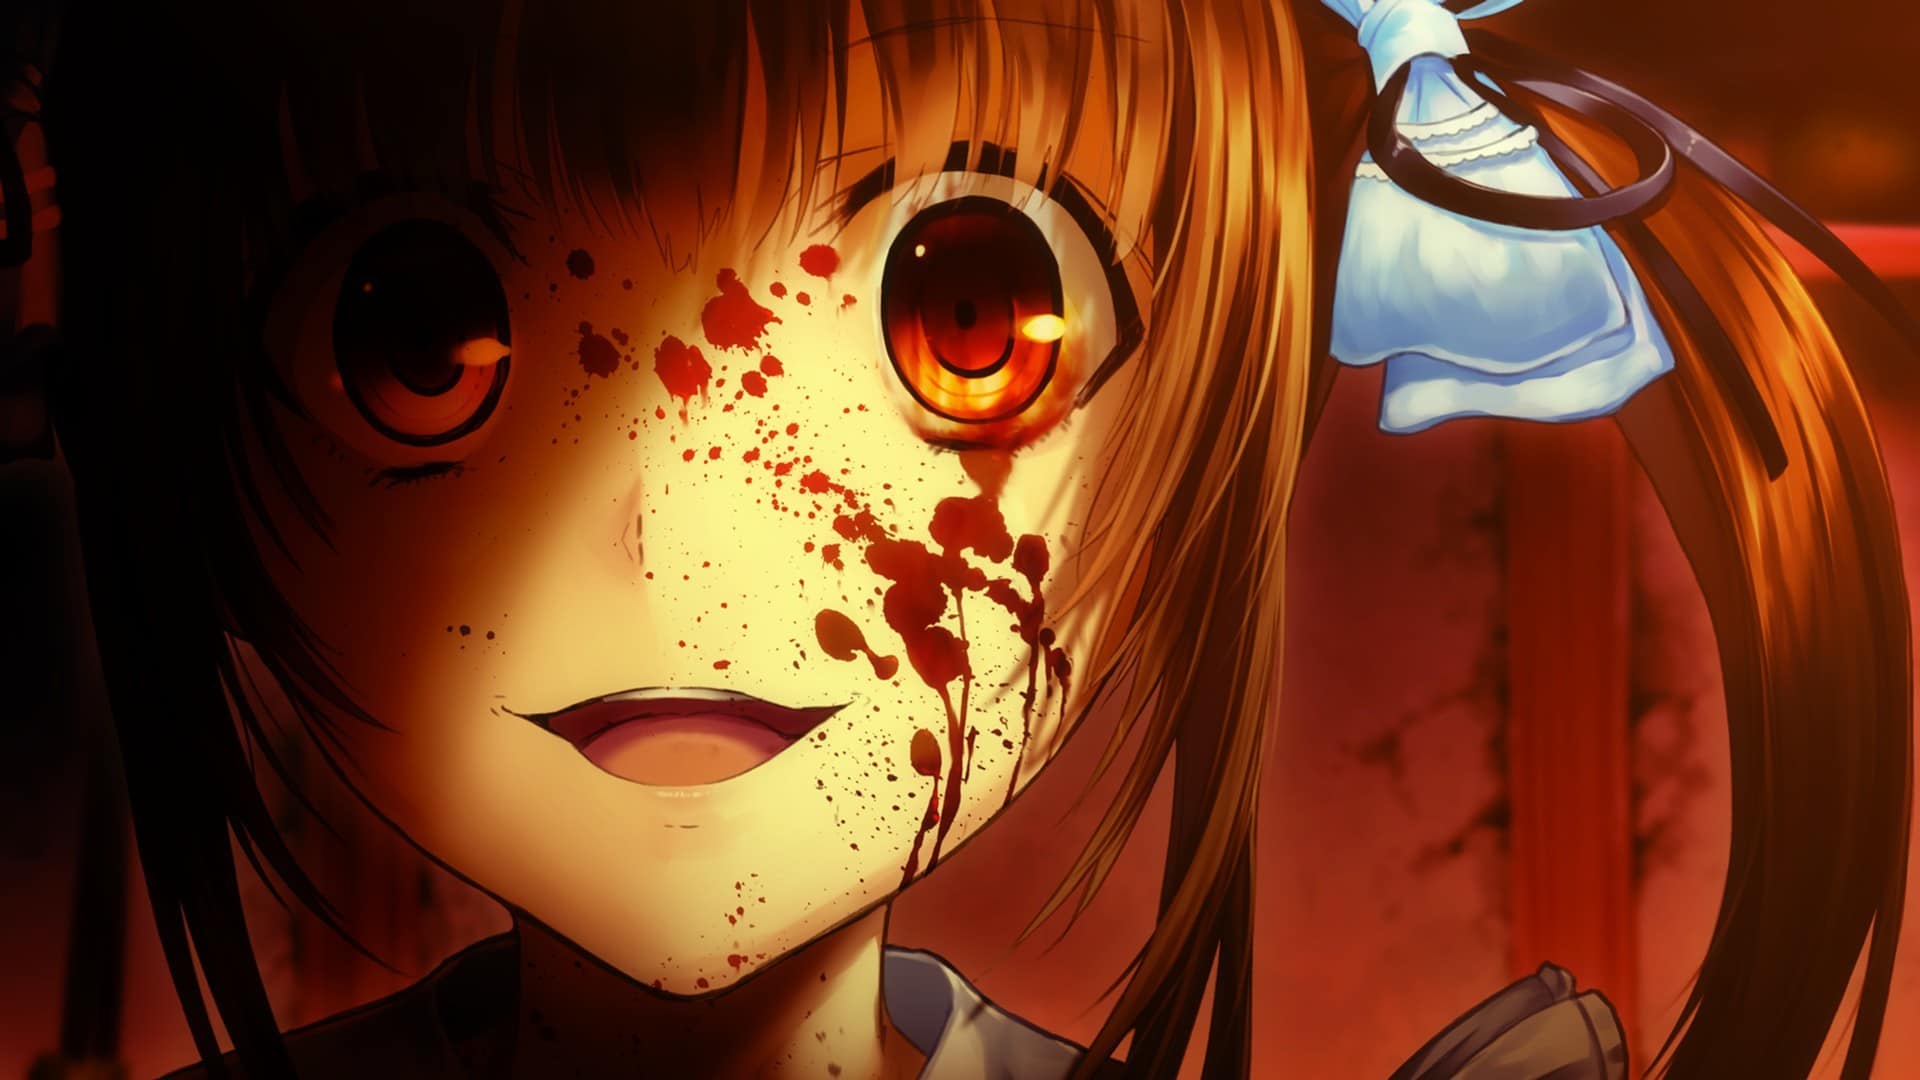 Horror Visual Novel Penned by Ryukishi07 ‘Iwaihime’ Coming West to PC With Enhanced Visuals; Demo Available Now